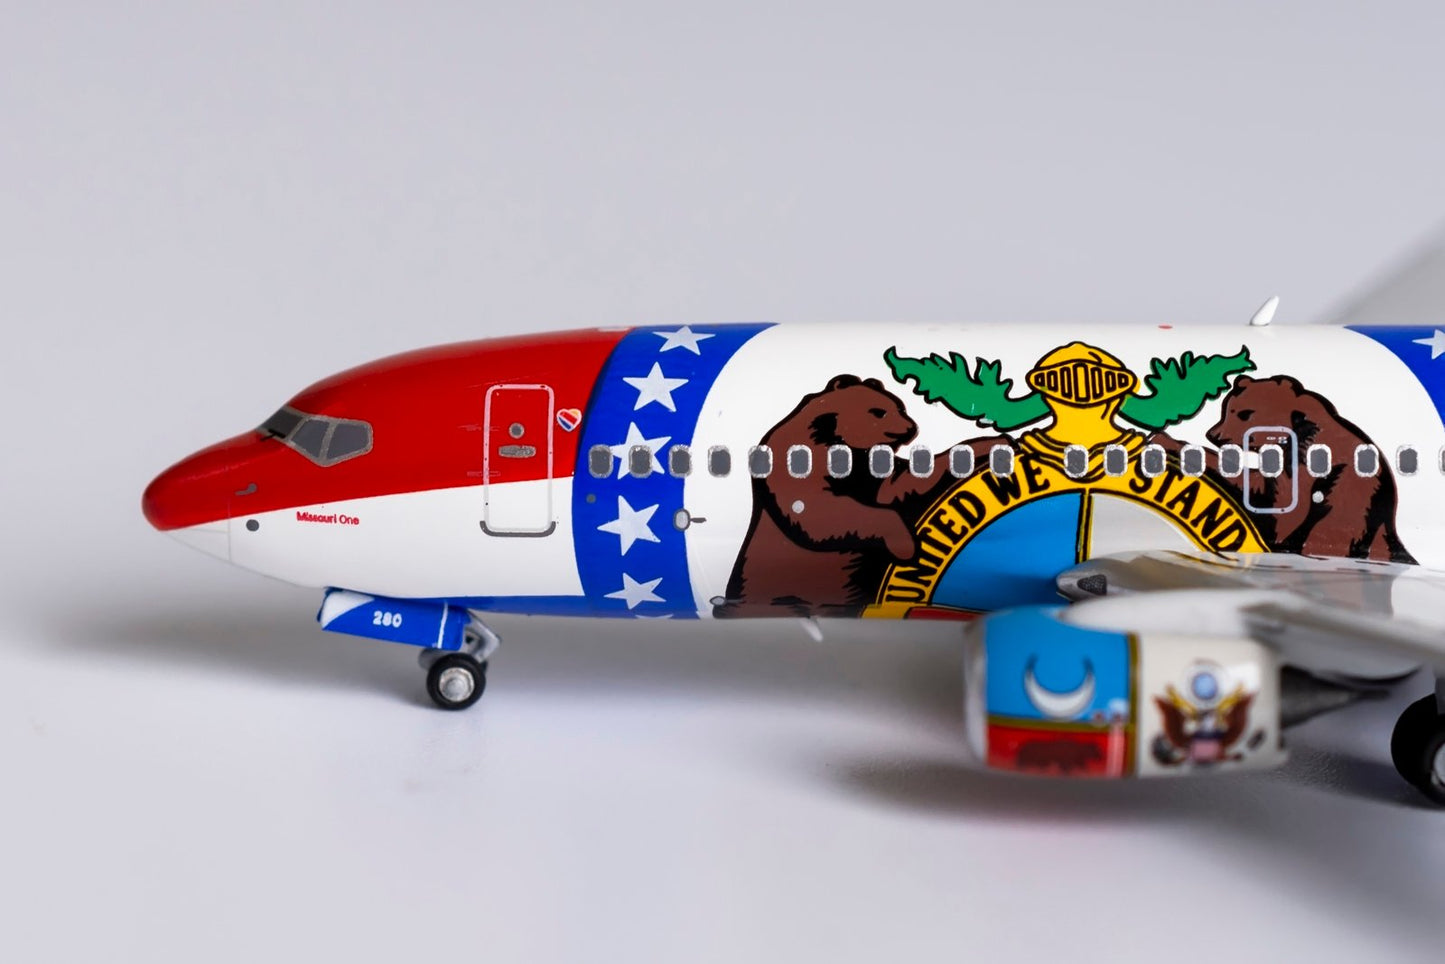 1:400 NG Models Southwest Airlines Boeing 737-700/w "Missouri One with scimitar winglets" N280WN NG77016